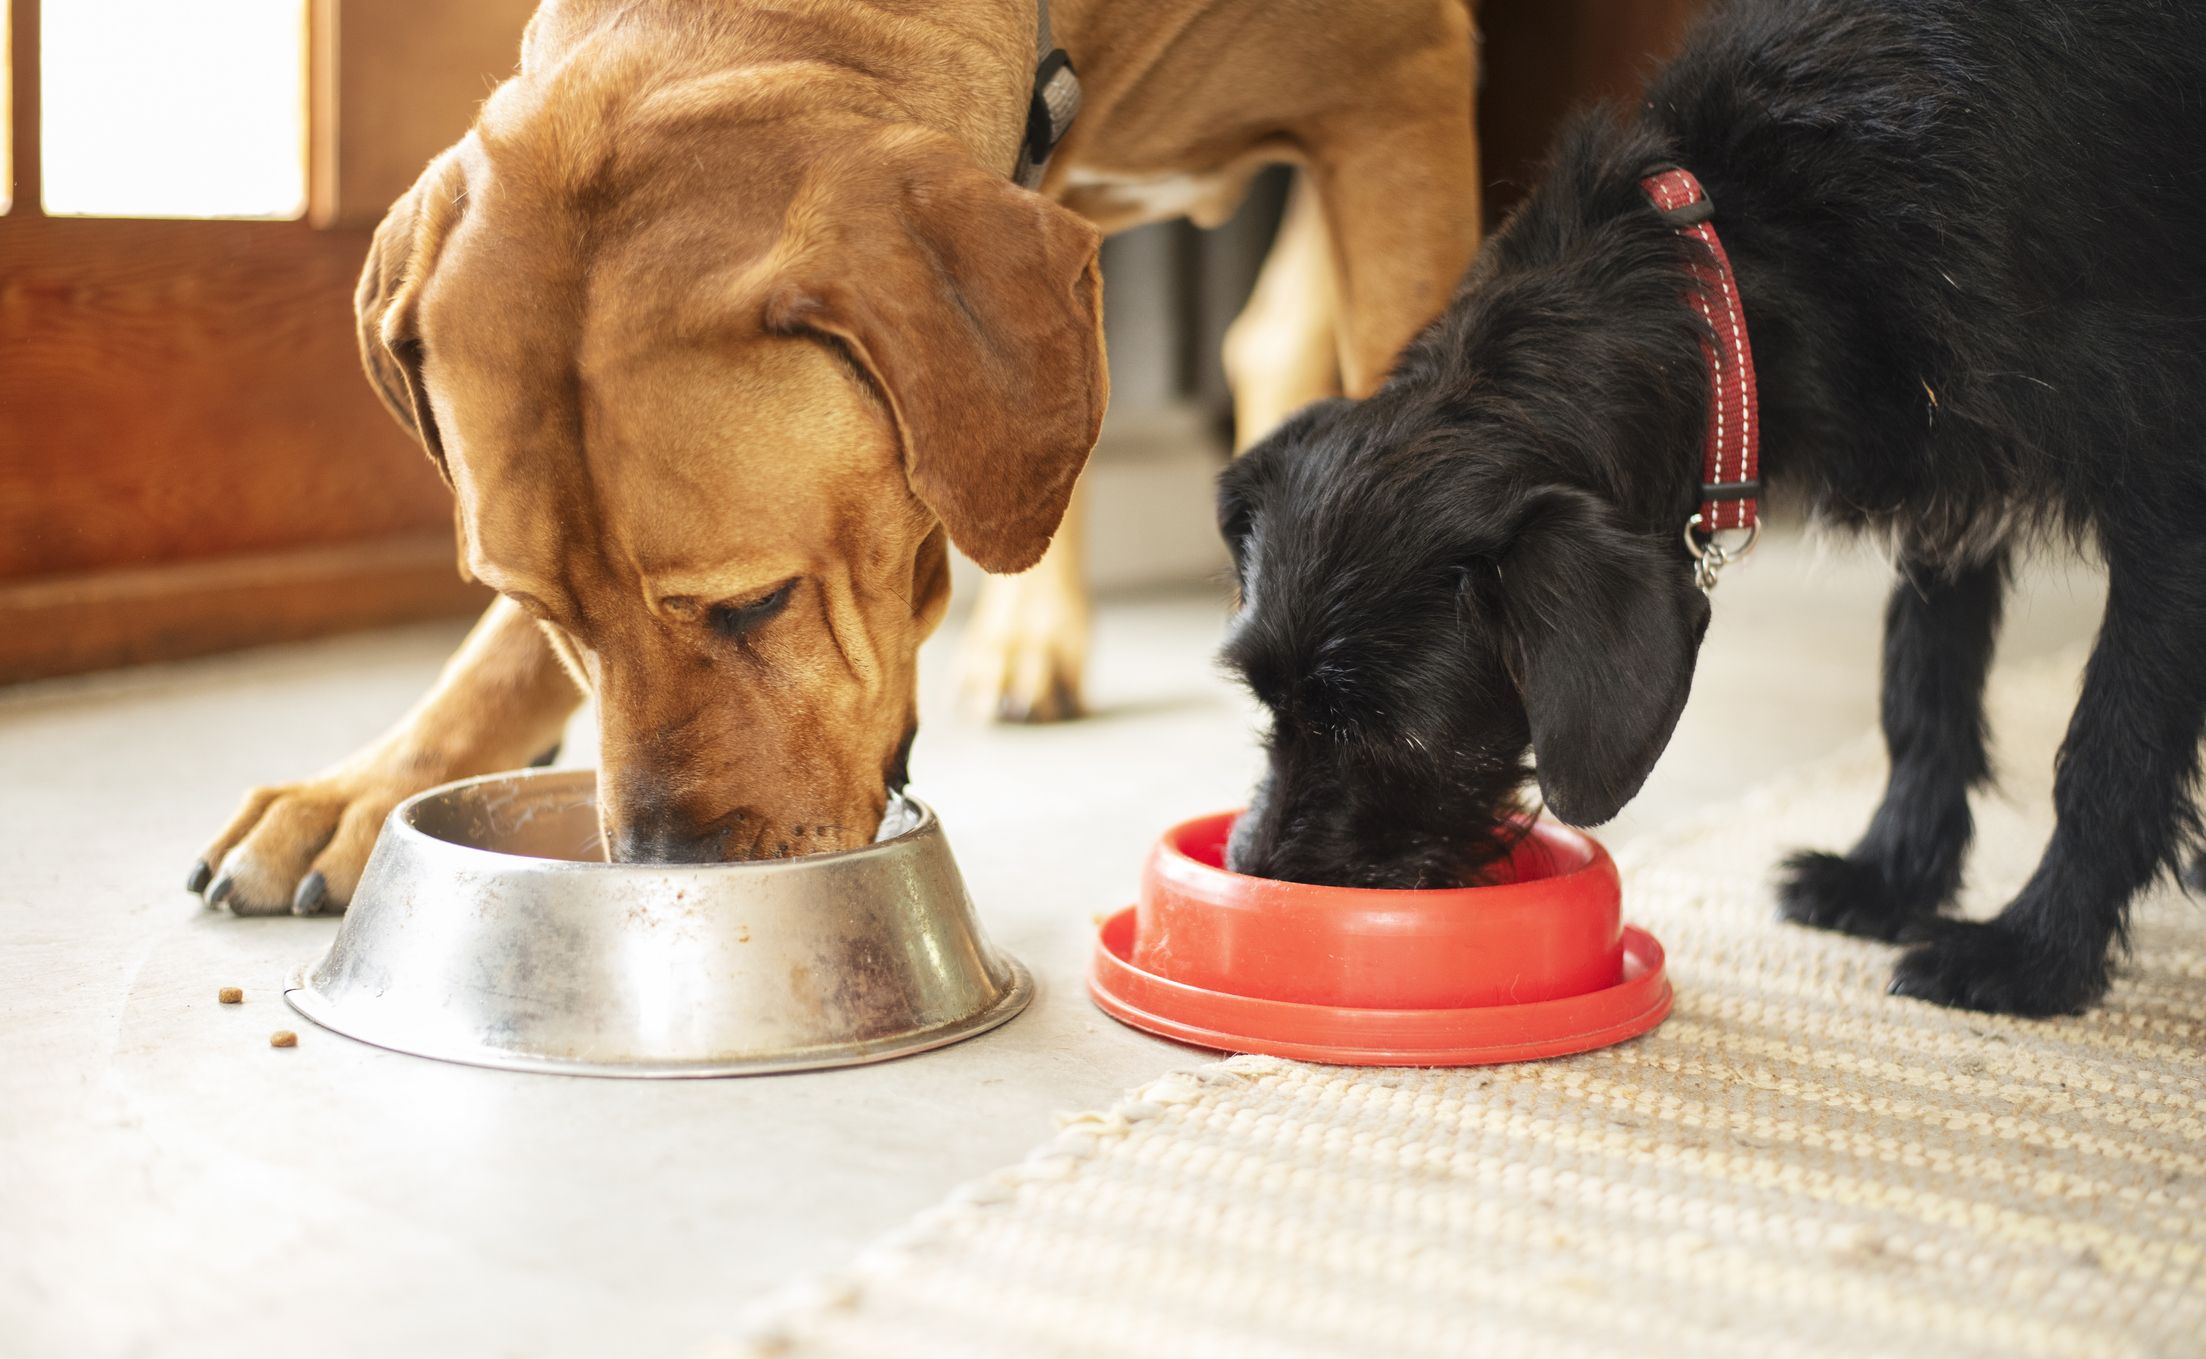 How Long Does It Take For Dogs to Digest Food? - Whole Dog Journal